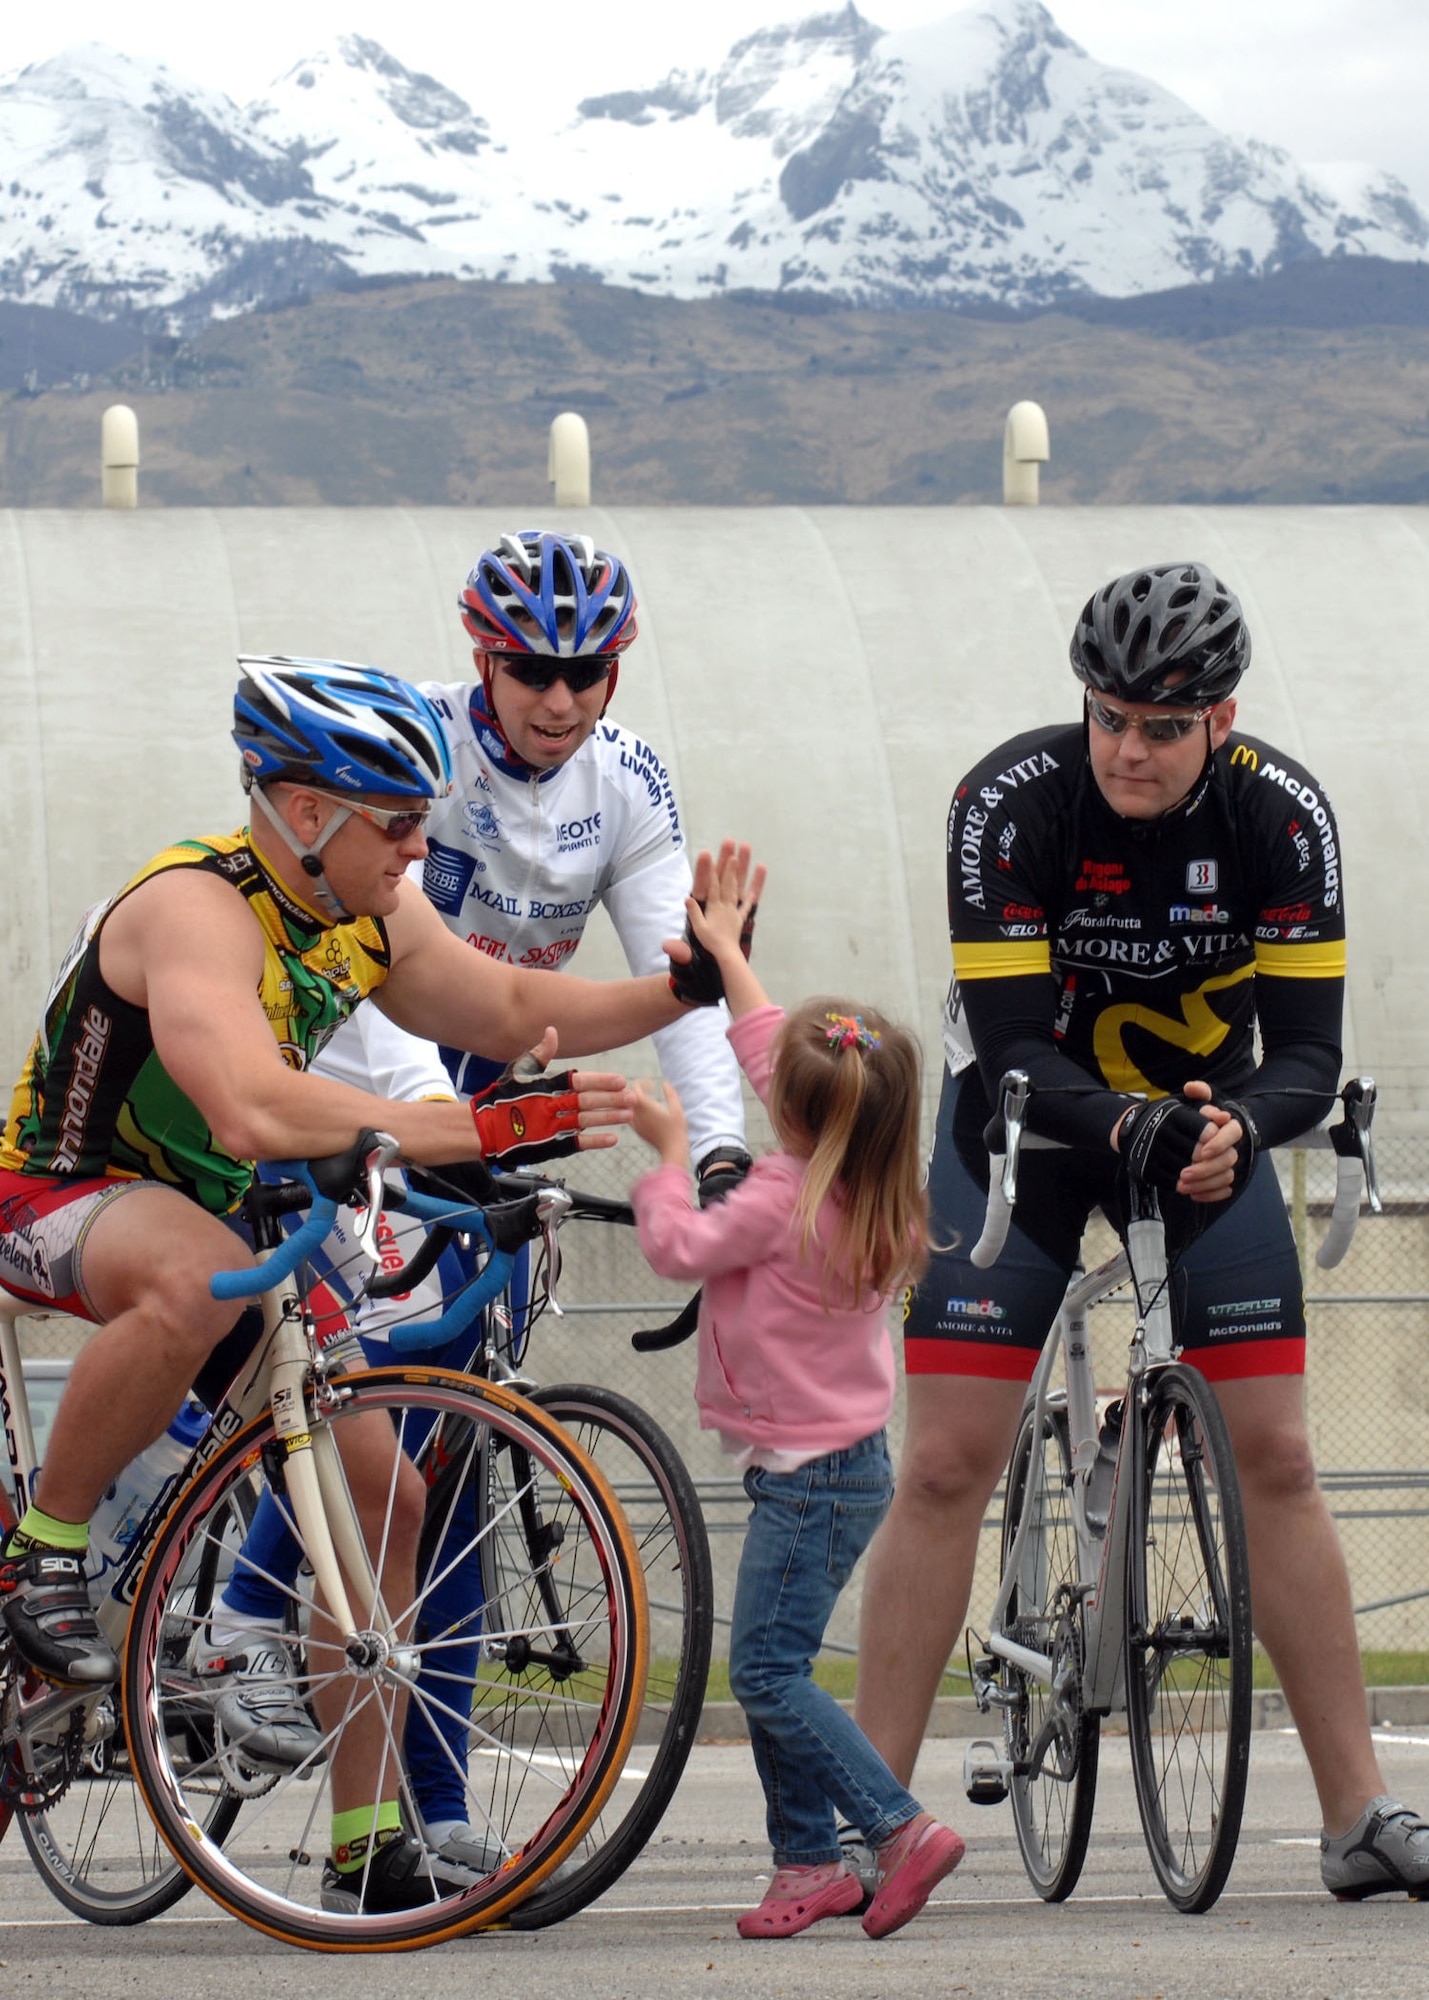 Timothy Schreiner, 31st Maintenance Squadron, receives a high-five from his five-year-old daughter Brynn while talking with fellow maintainers Aron Tidwell, center, and Erik Ryland, right, prior to the start of the 53 kilometer race here April 19. The race is part of the 2009 U.S. Forces Europe Road Cycling Series. (U.S. Air Force photo/Tech. Sgt. Michael O'Connor)